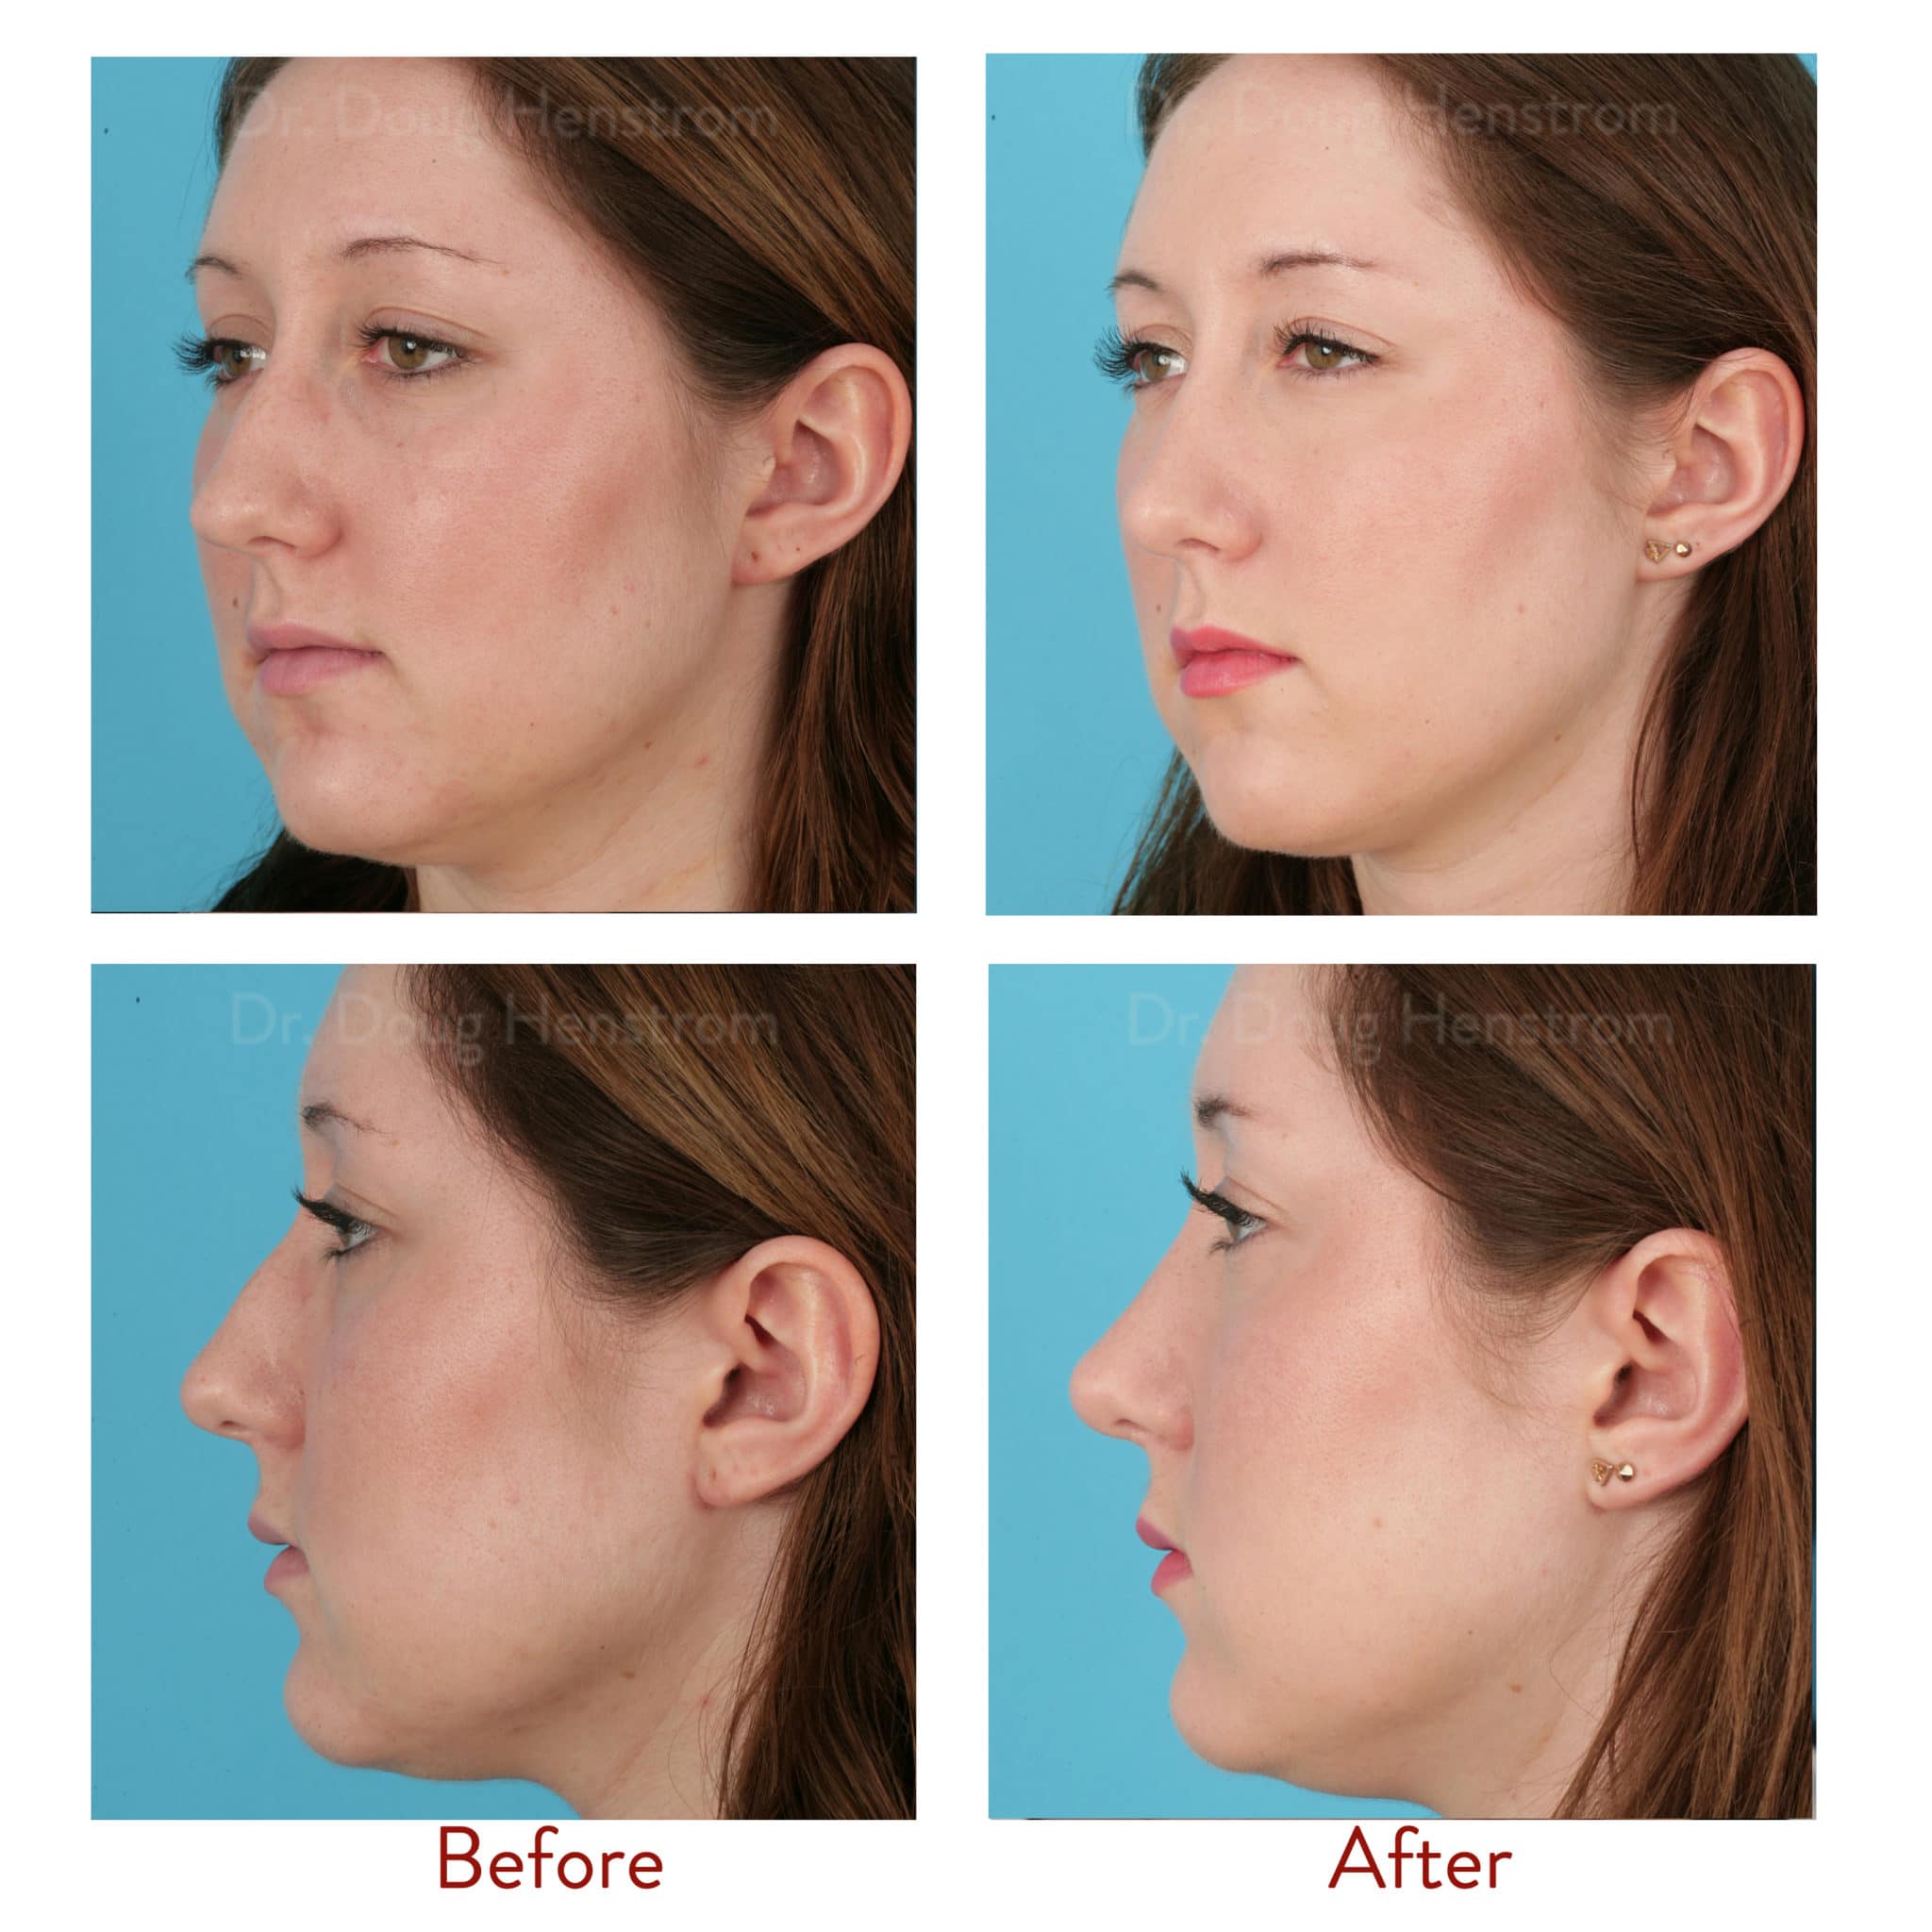 What is Cosmetic Surgery of the Nose?